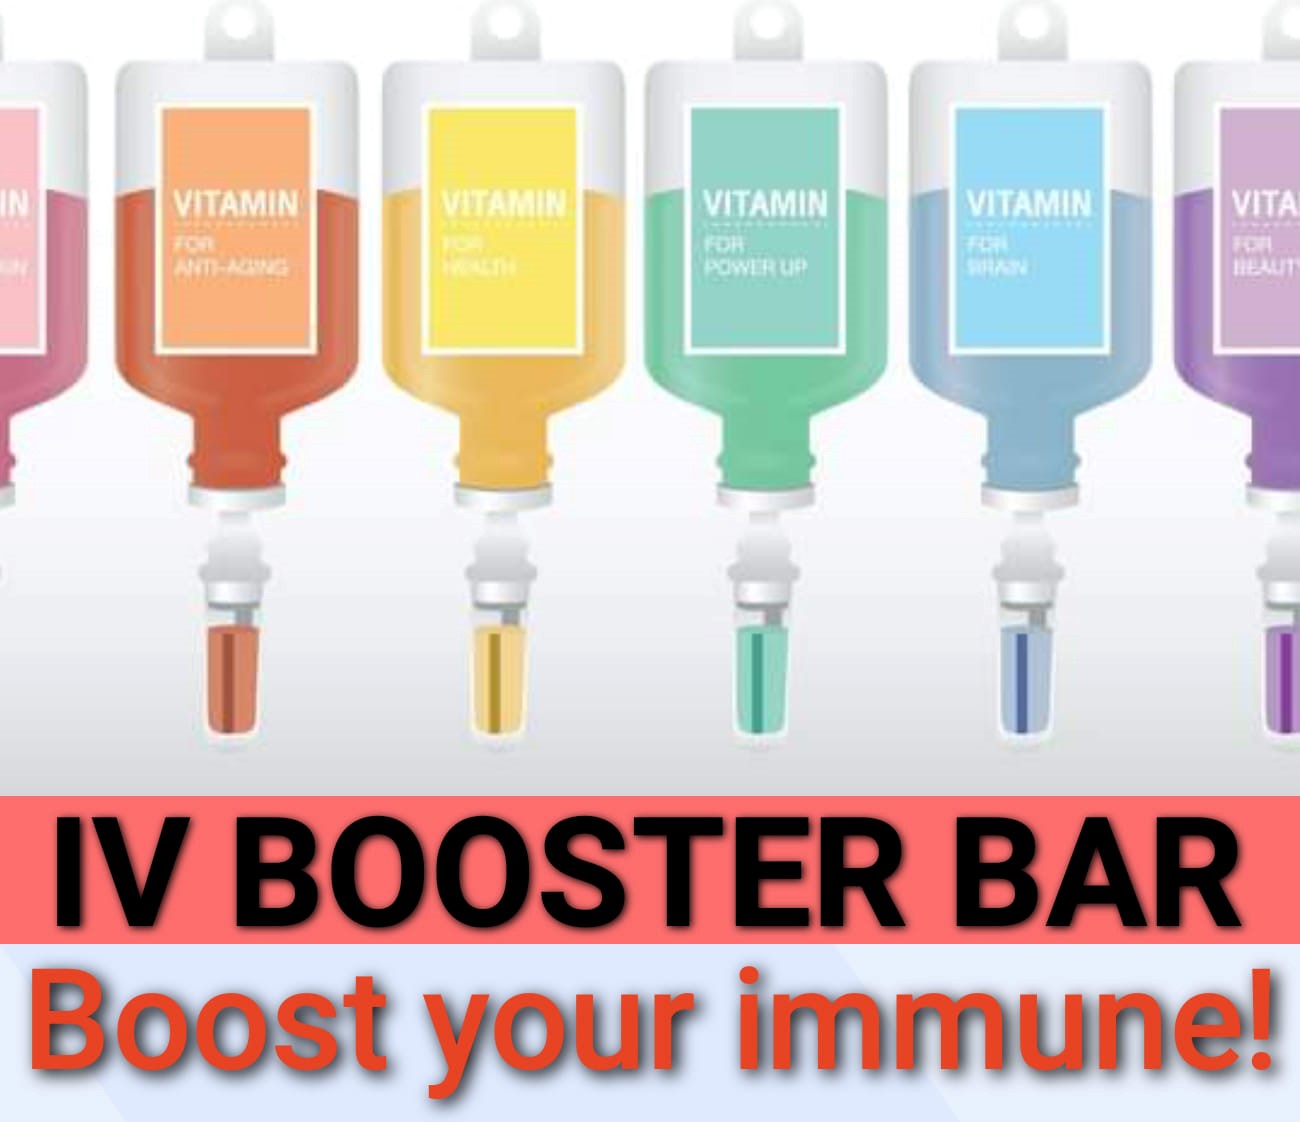 IV Booster Bar and Medical Centre 8